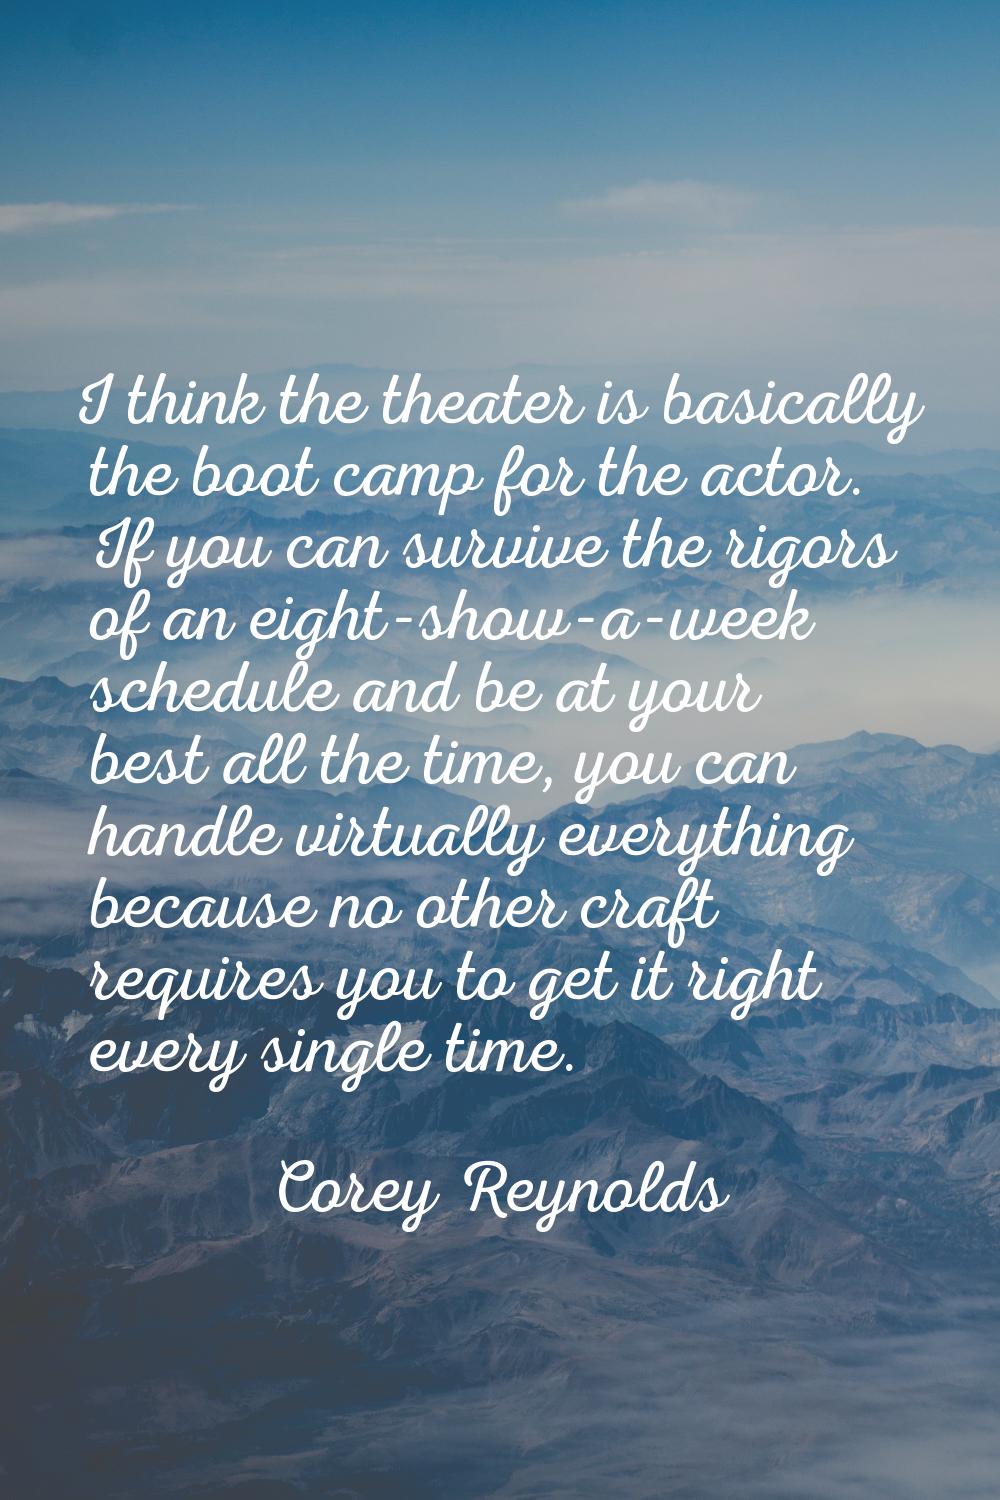 I think the theater is basically the boot camp for the actor. If you can survive the rigors of an e